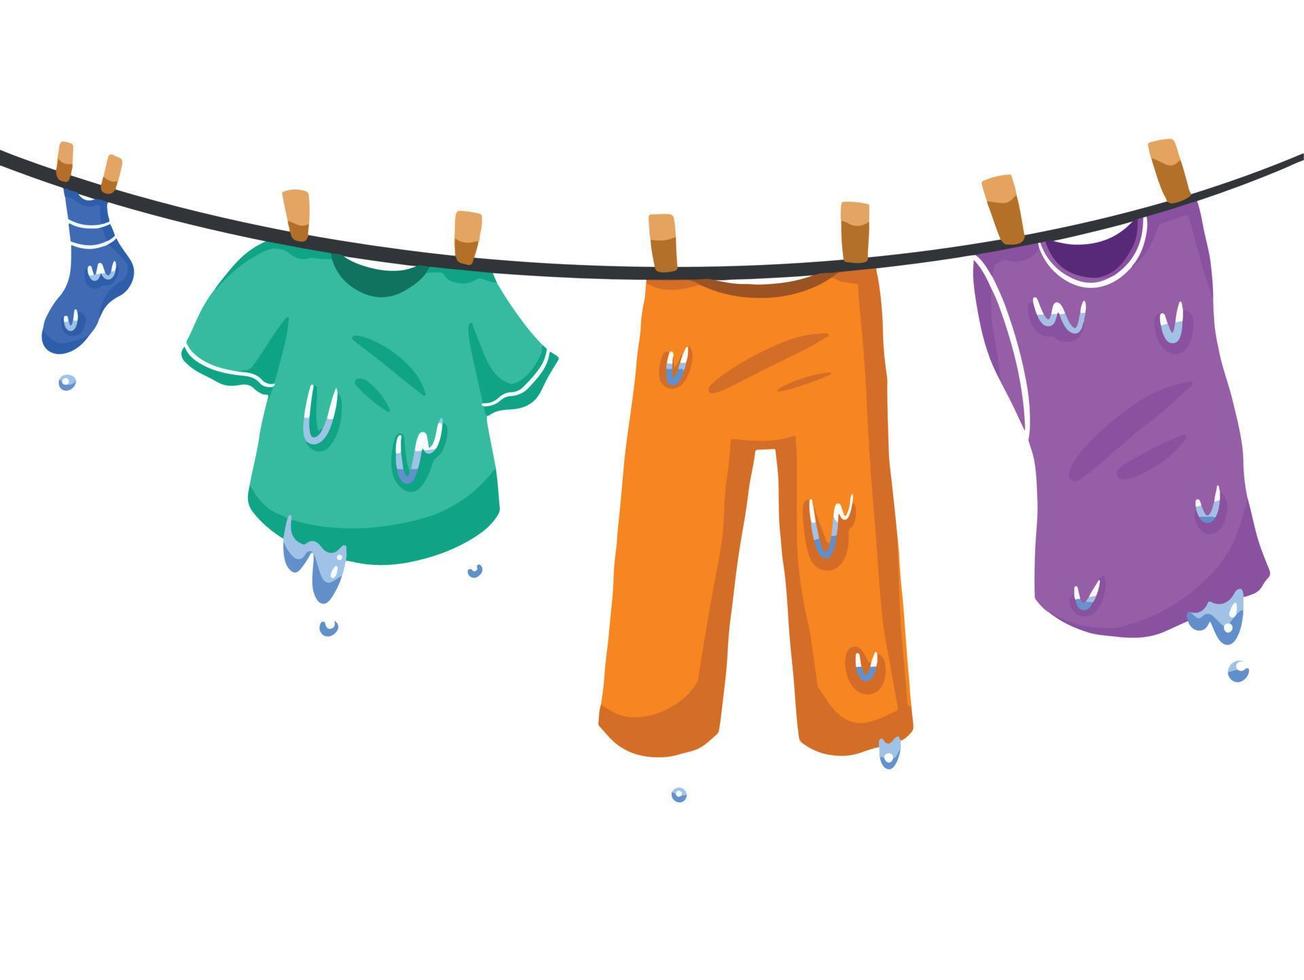 https://static.vecteezy.com/system/resources/previews/014/005/922/non_2x/illustration-of-cartoon-hanging-wet-clothes-pants-tank-top-shirt-and-sock-drying-clothes-on-cloth-line-on-white-background-illustration-with-flat-style-drawing-vector.jpg